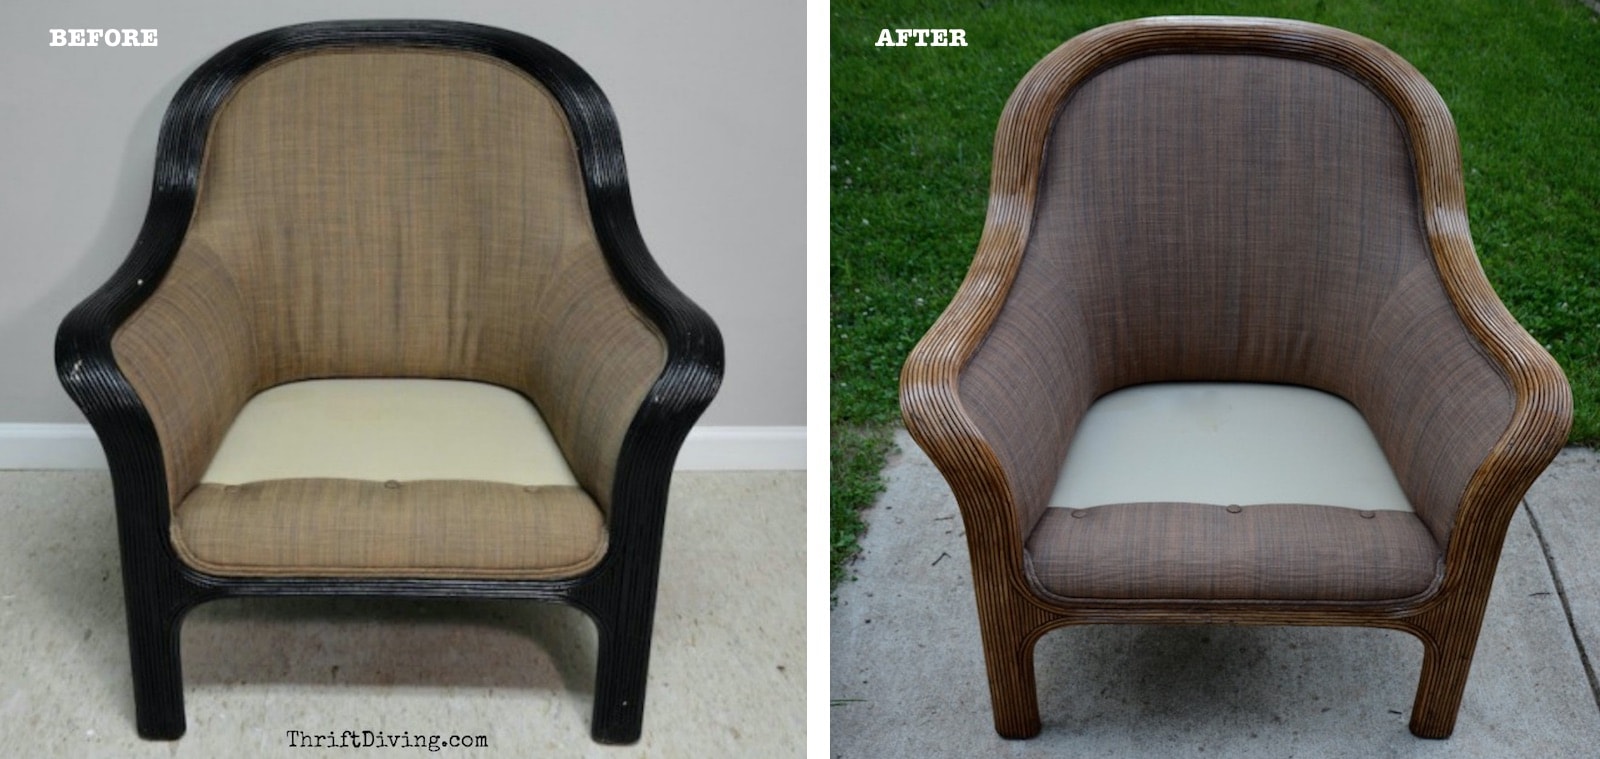 How to Strip Furniture and Stain Wood - Strip old paint from chairs. - Everything You Wanted to Know About Furniture Stripping If You're a Newbie - Thrift Diving 